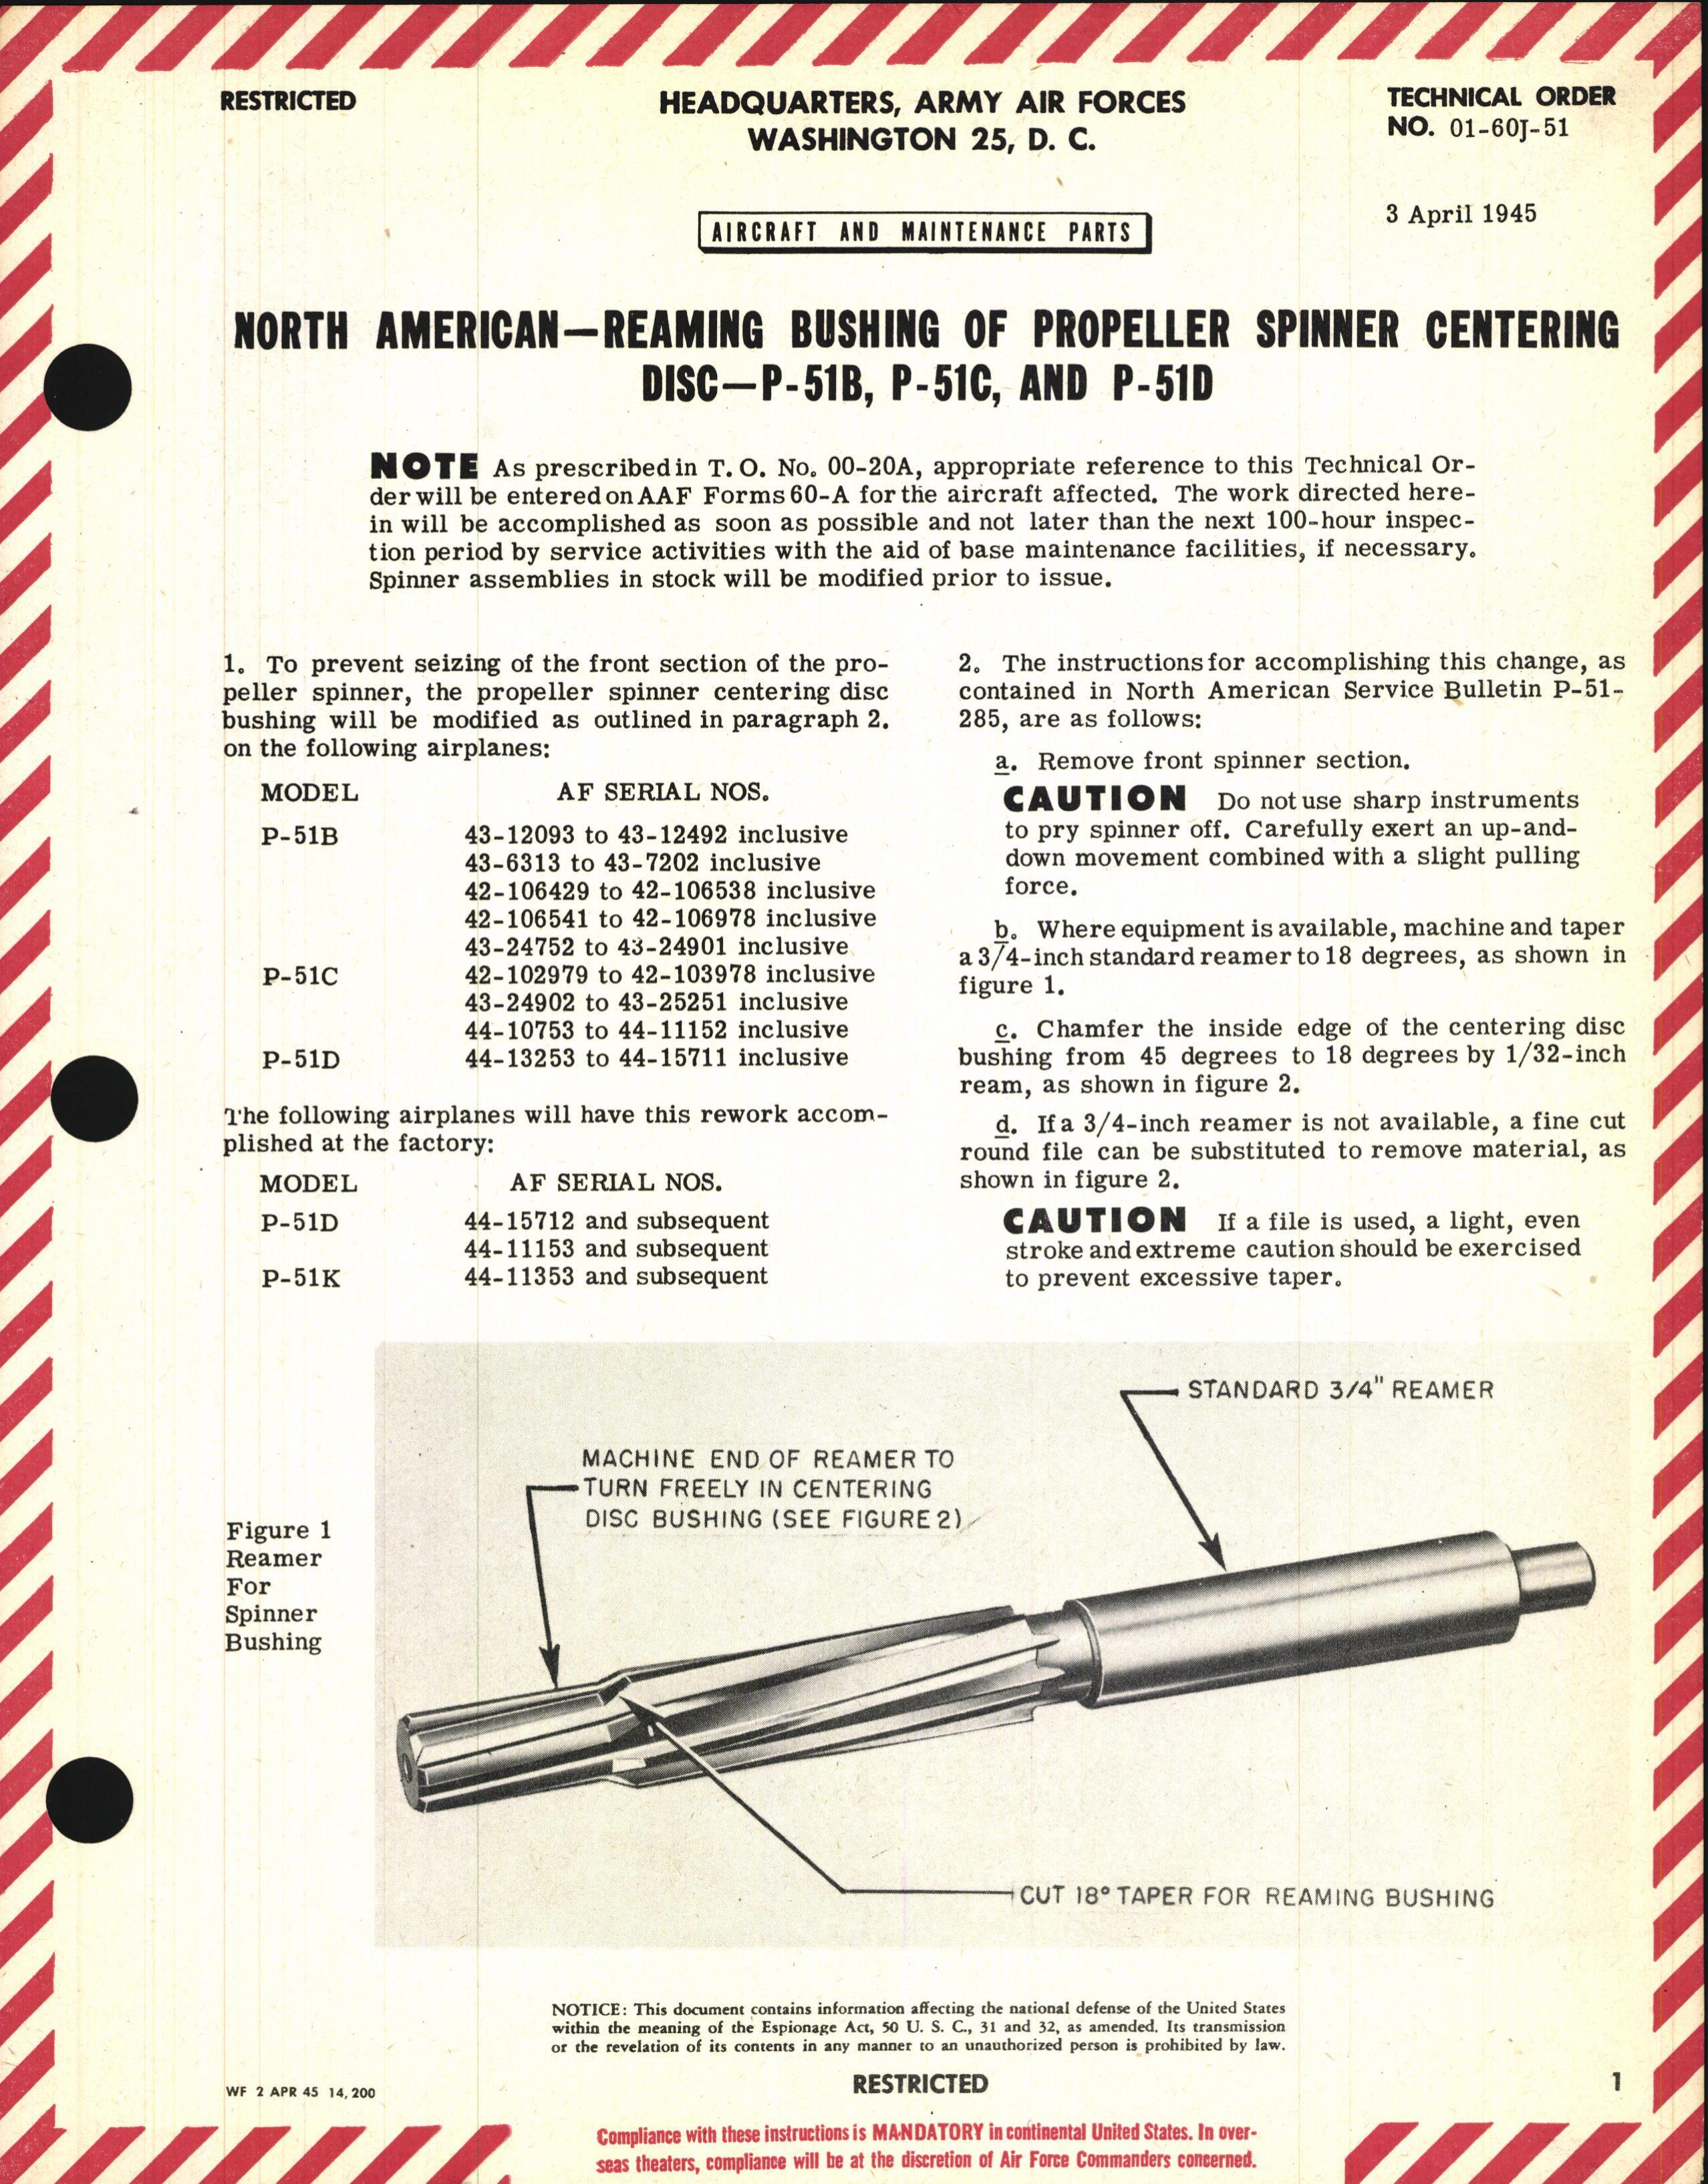 Sample page 1 from AirCorps Library document: Reaming Bushing of Propeller Spinner Centering Disc for P-51B, C, and D